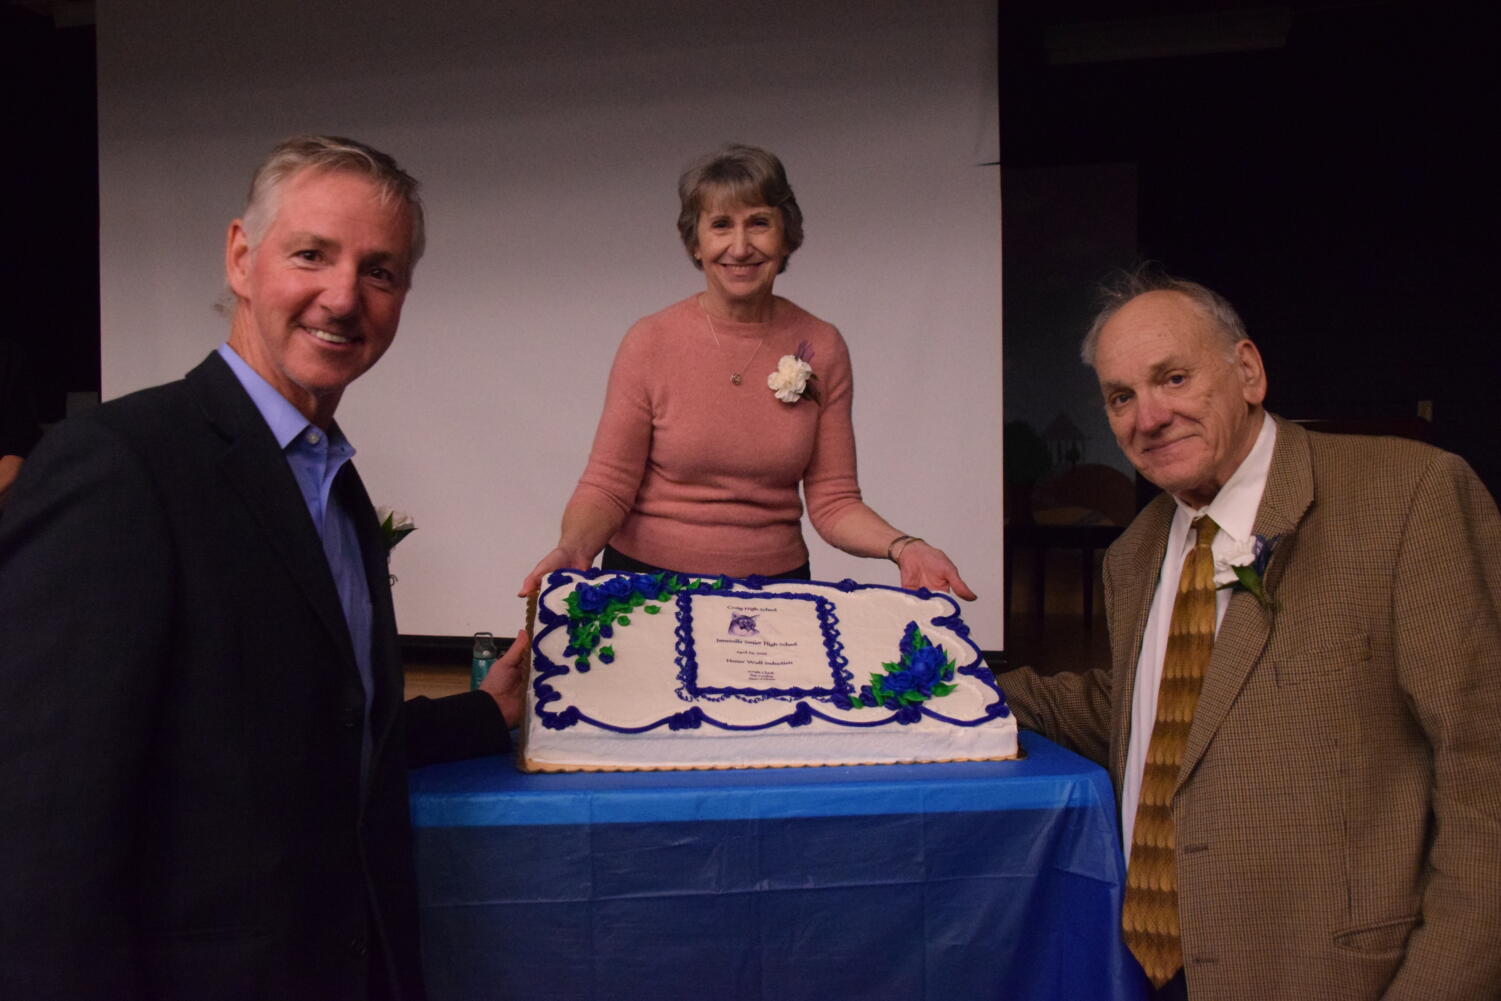 Joe Clark (class of 80), Sue Conley (class of 78), and Stan Milam (class of 66) were inducted into Craigs Honor Wall on Friday, April 29, 2022. 